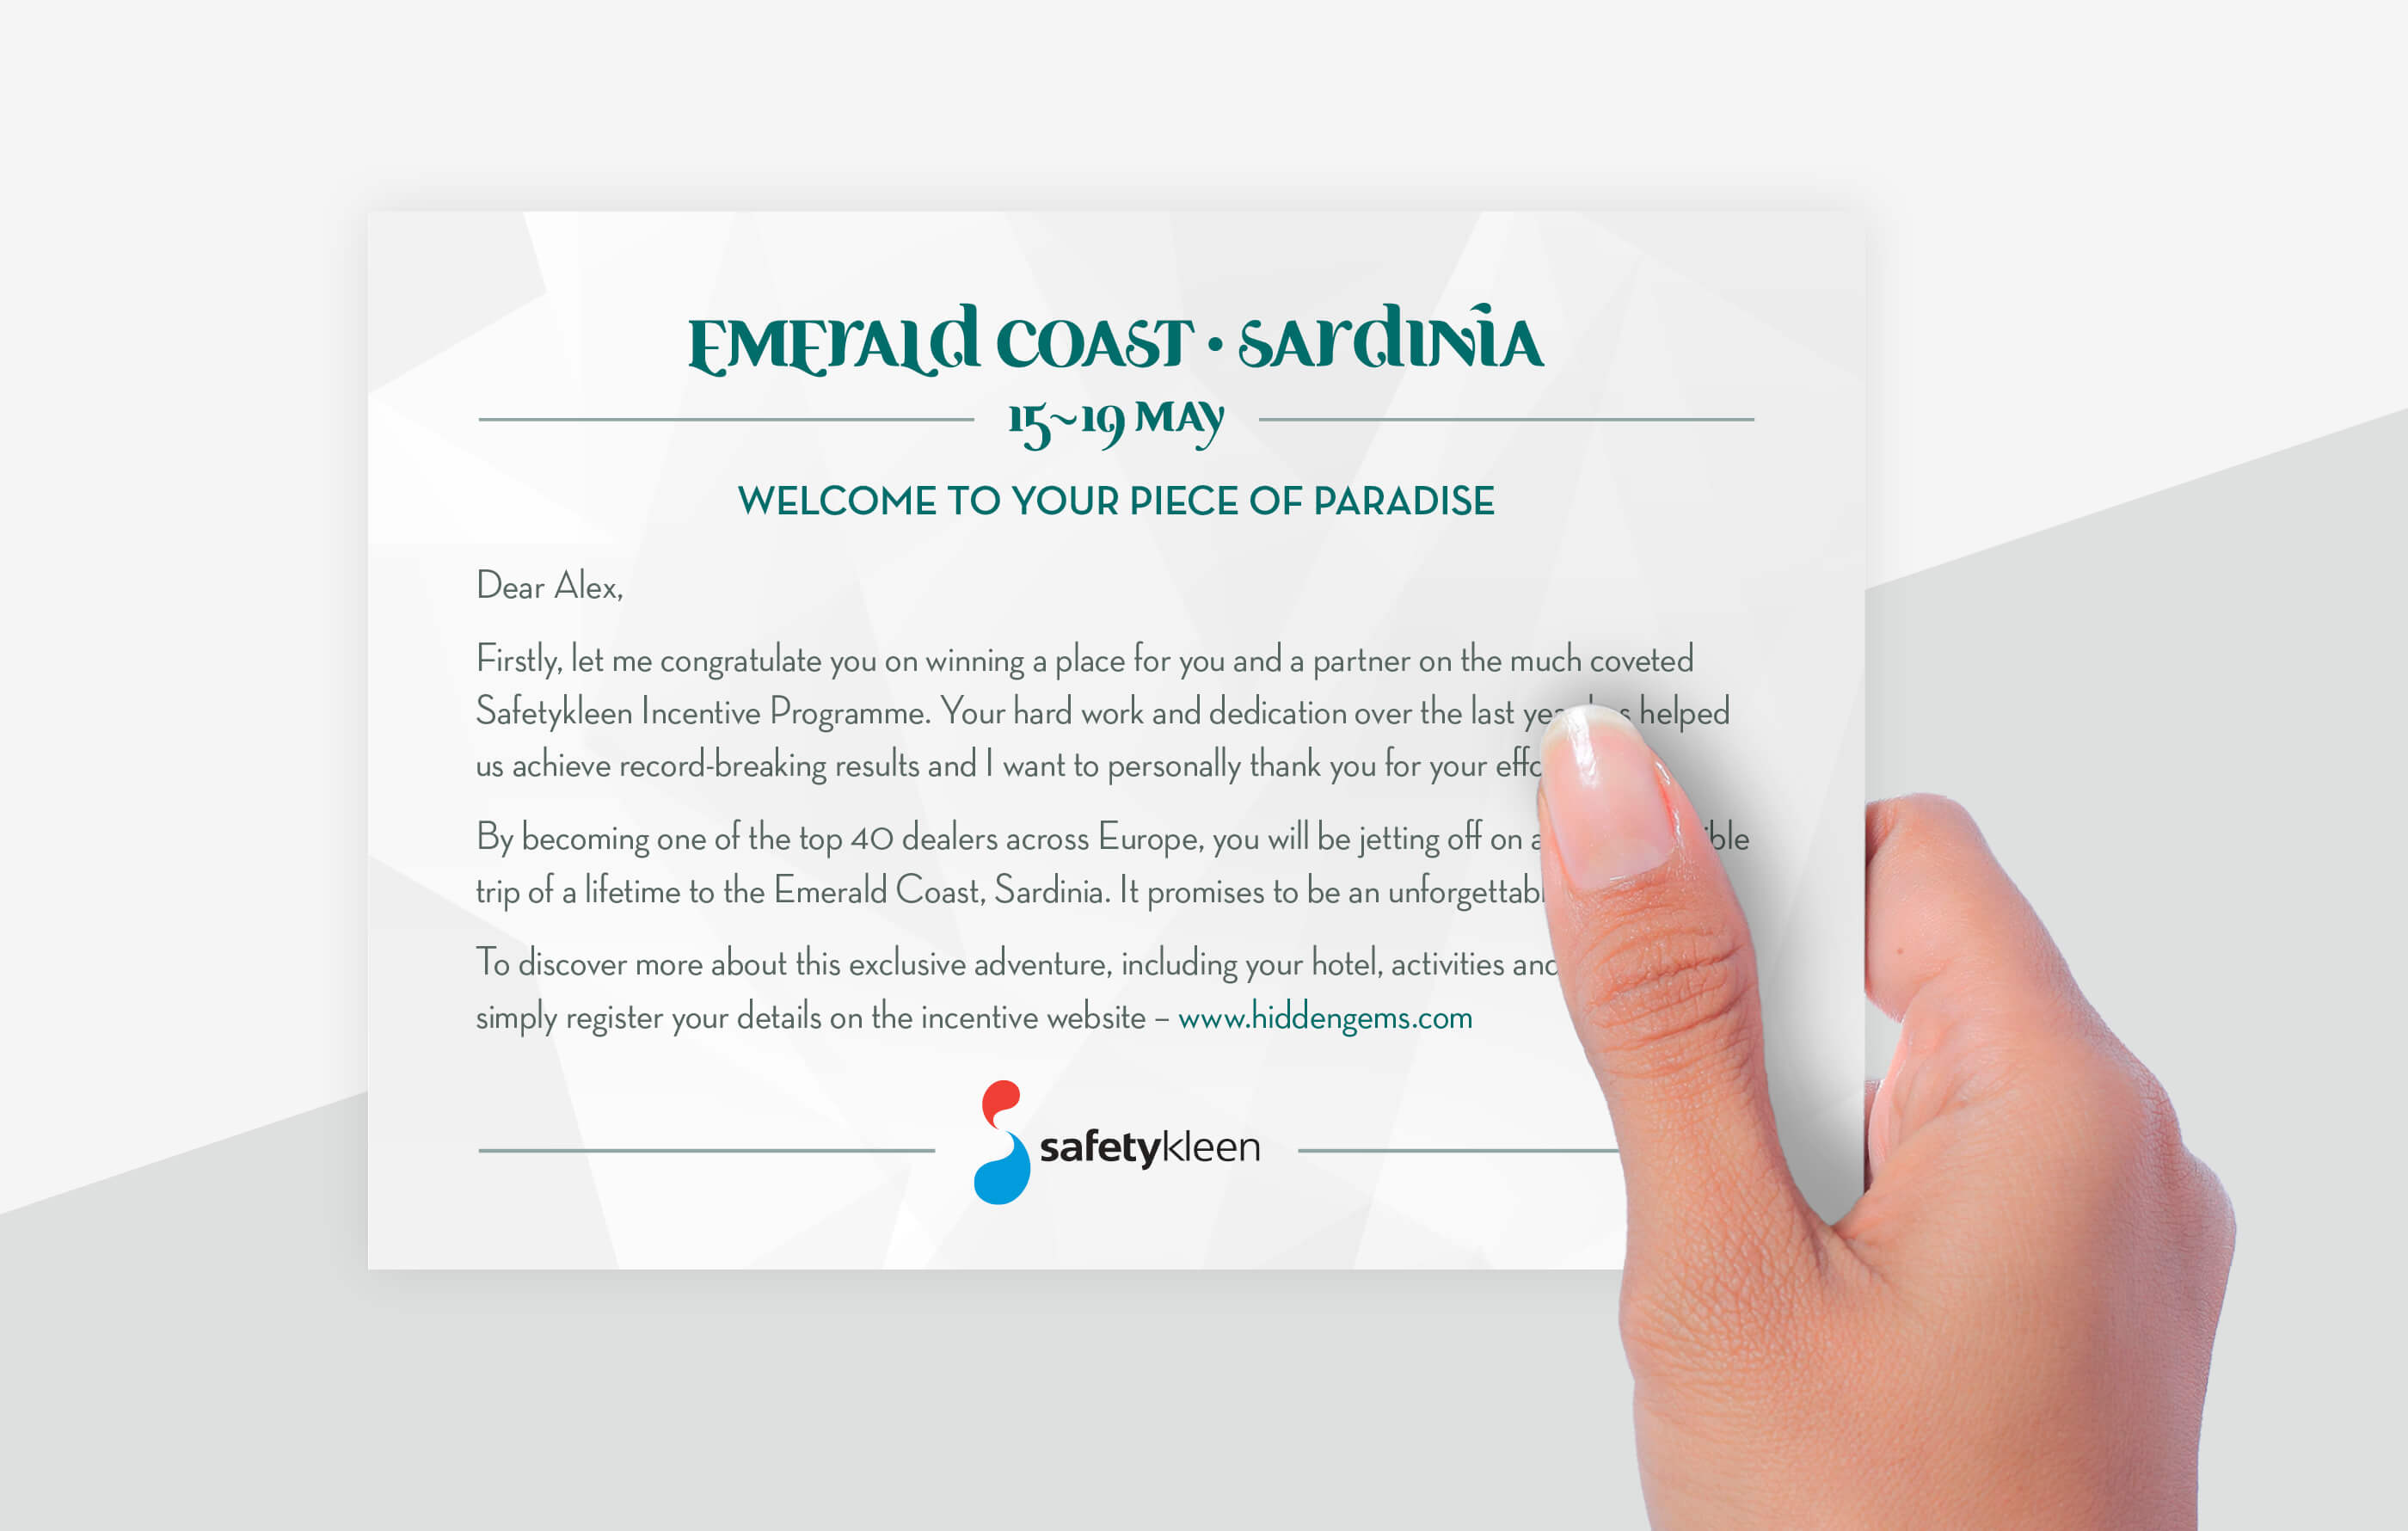 Female hand holding a Hidden Gems winners card, which contratulates them for securing a place on the much coveted incentive trip to the Emerald Coast, Sardinia and invites them to visit a website for further details